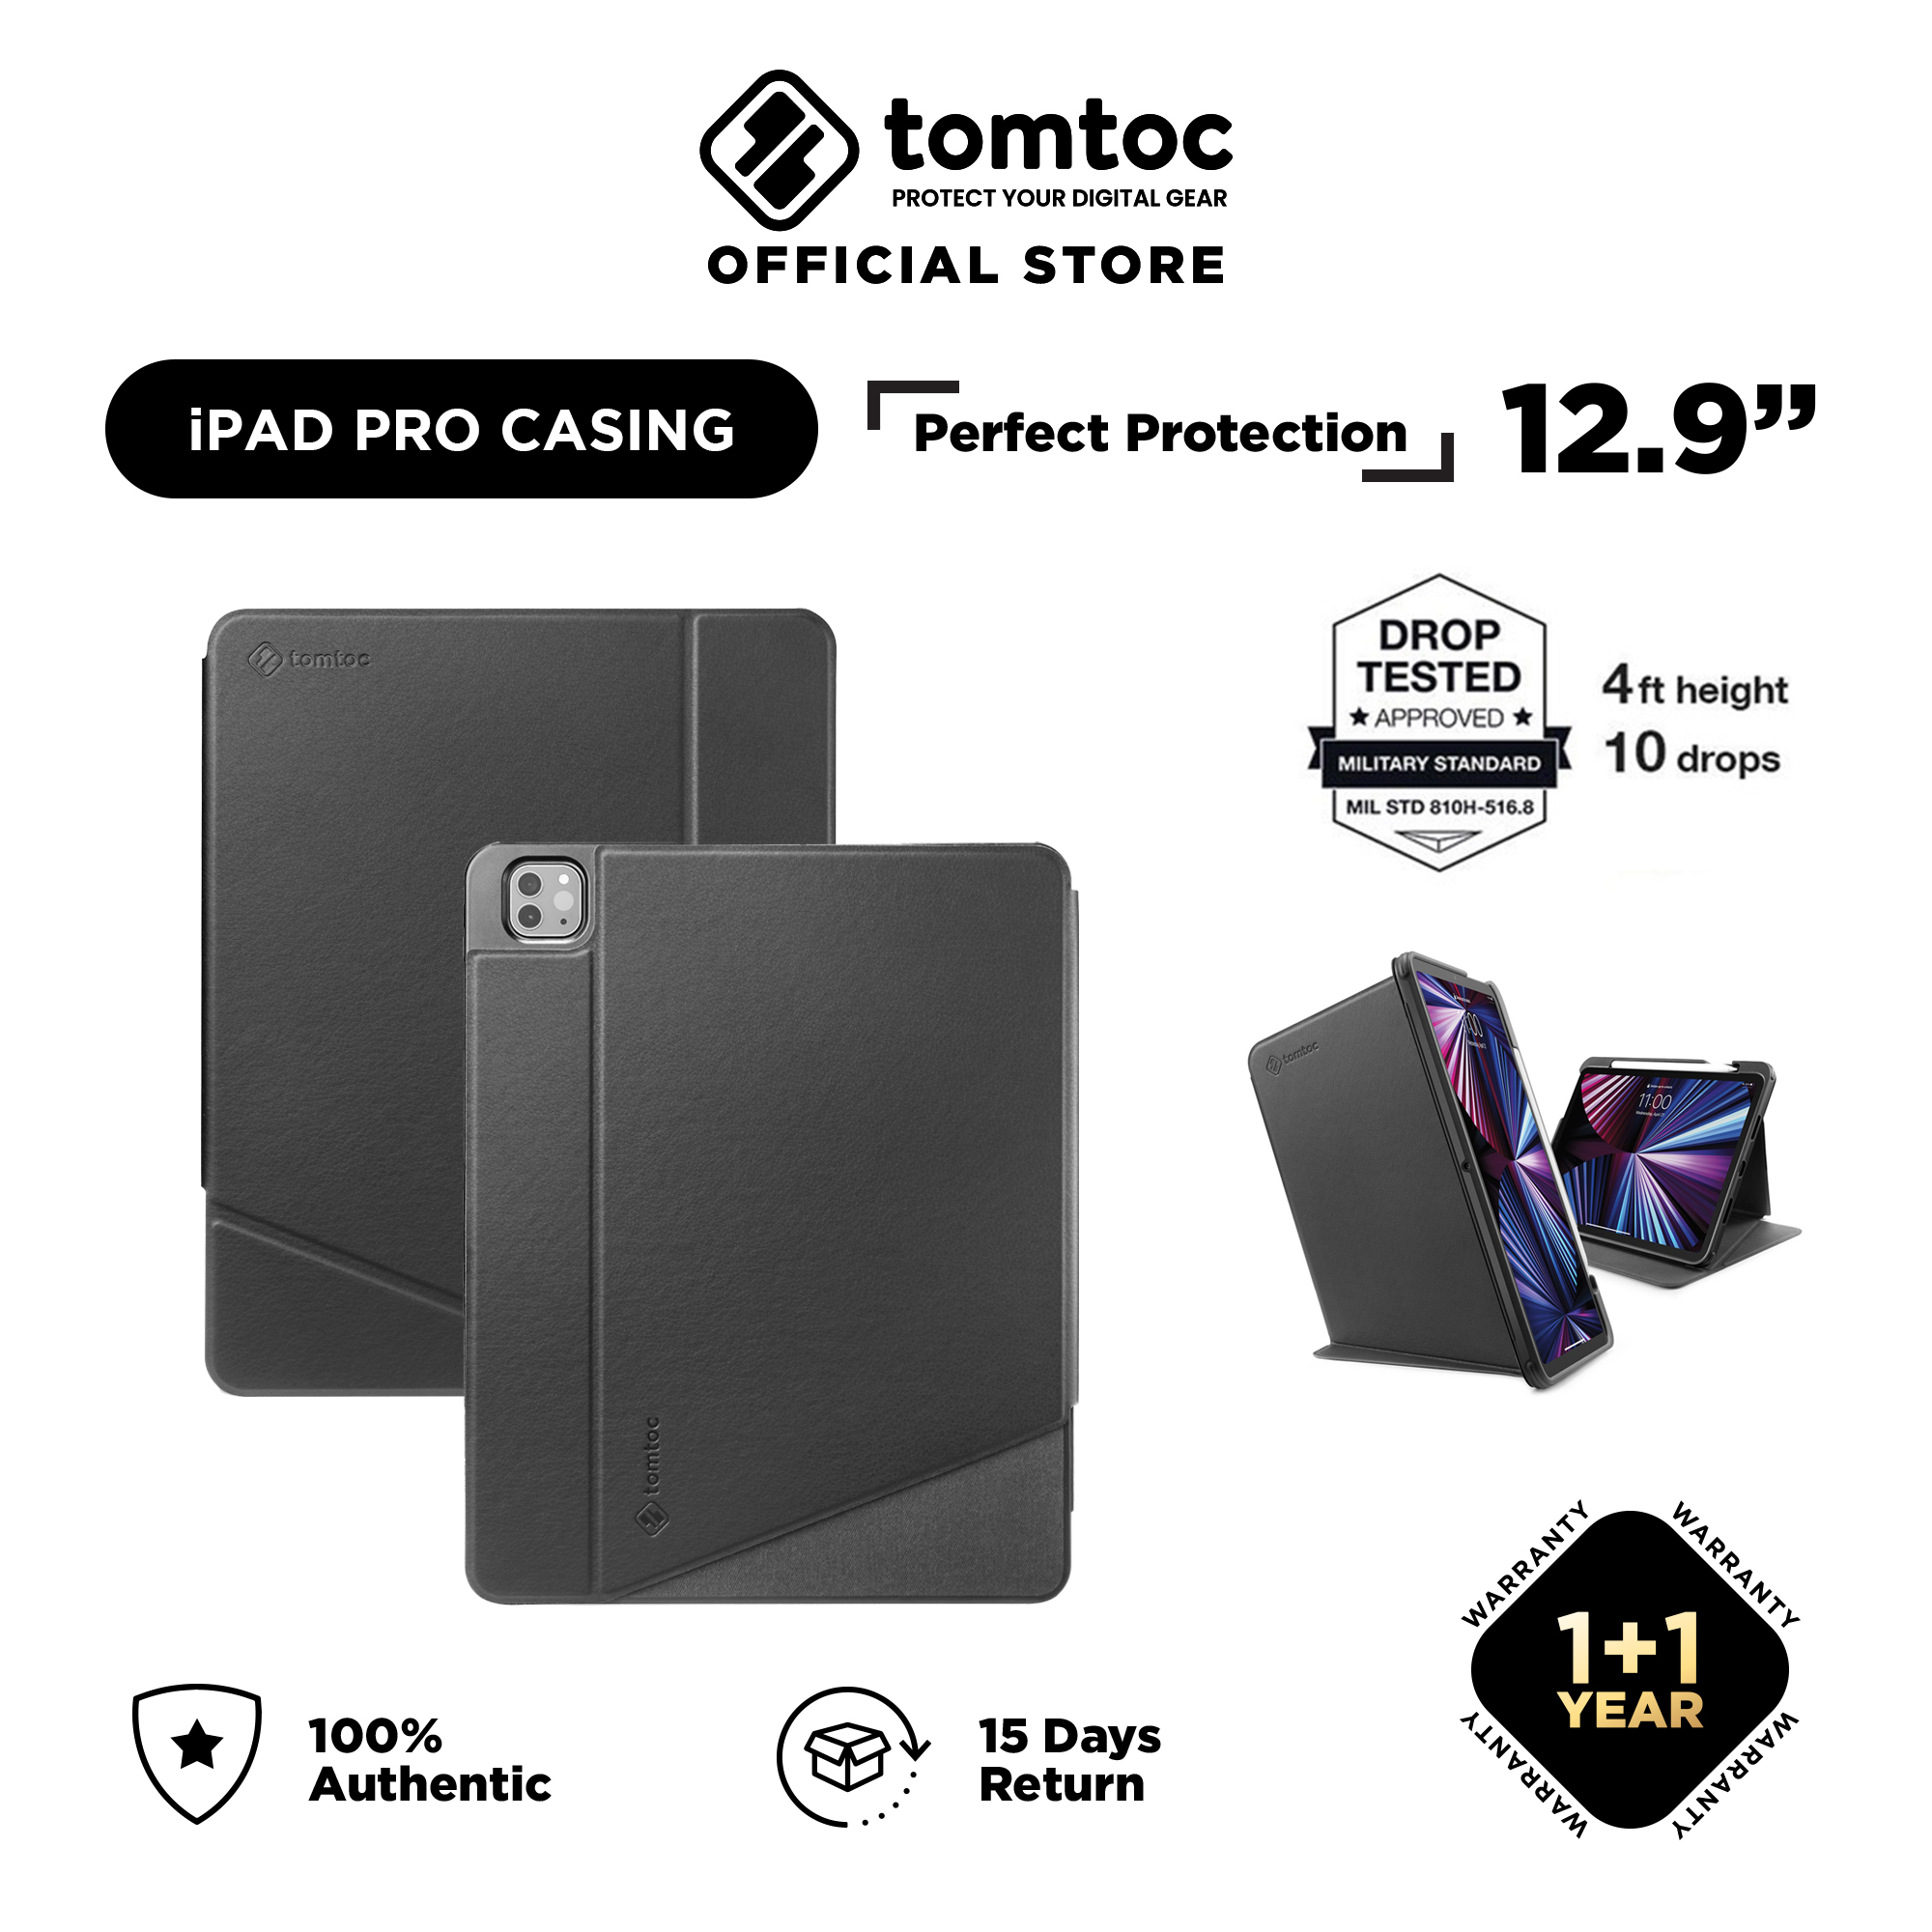 tomtoc Padfolio Eva Carrying Case for 12.9 inch iPad Air/Pro | Standard - Black / 12.9